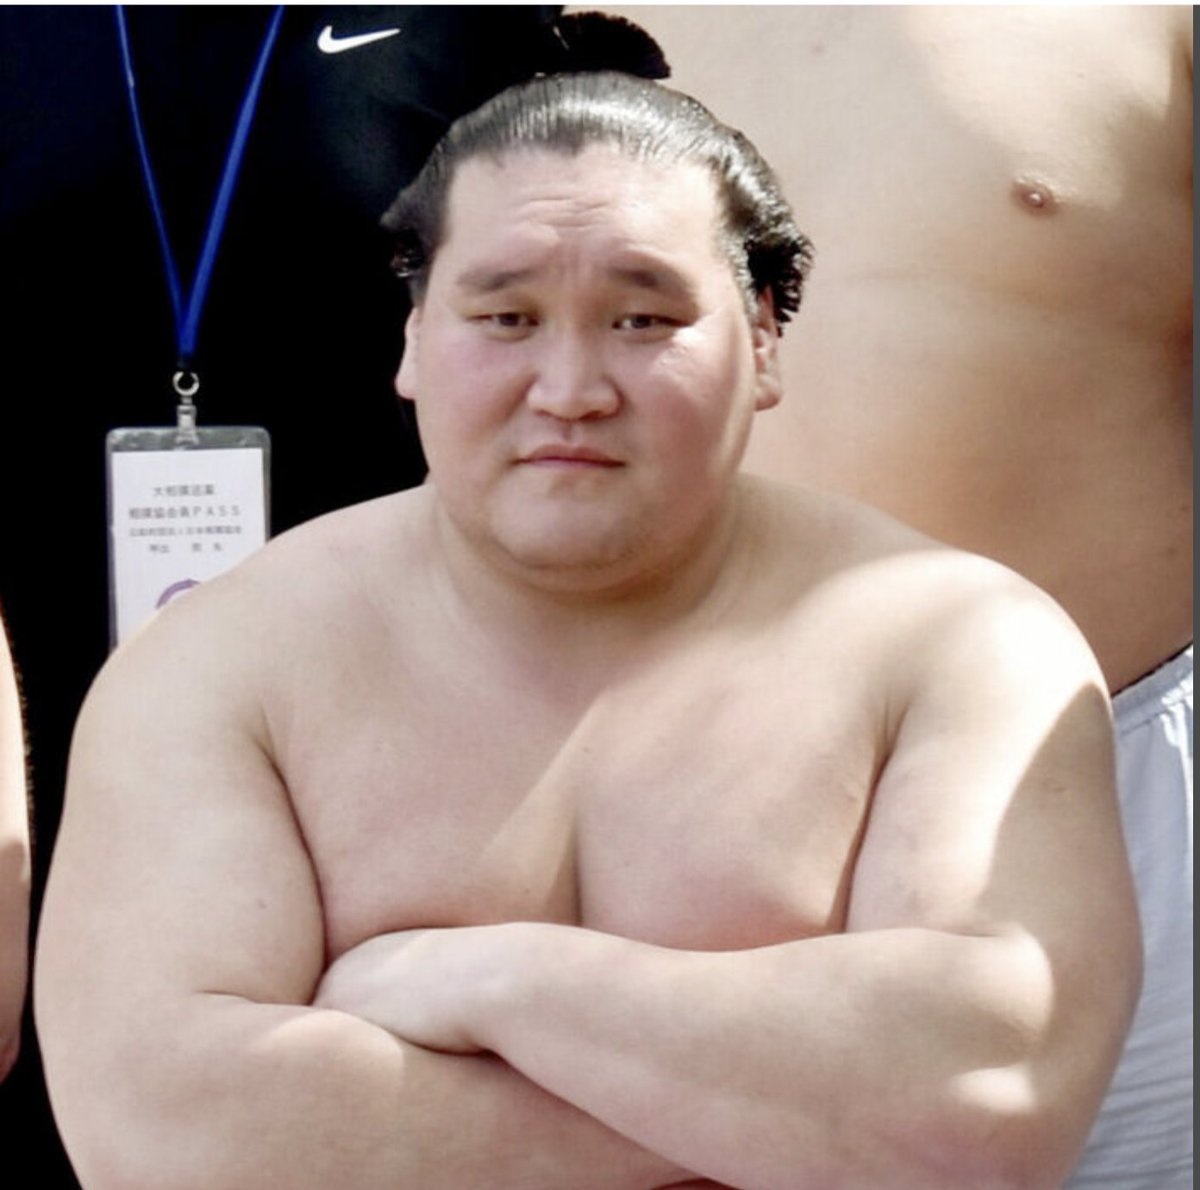 Terunofuji will compete in Natsu.

Terunofuji, who bowed out of the Haru Basho on Day Seven due to a back injury has announced that he's all in and ready to meet Komusubi Onosato on Day One of the Natsu Basho. 

There are concerns as the yokozuna is still experiencing sudden pain…